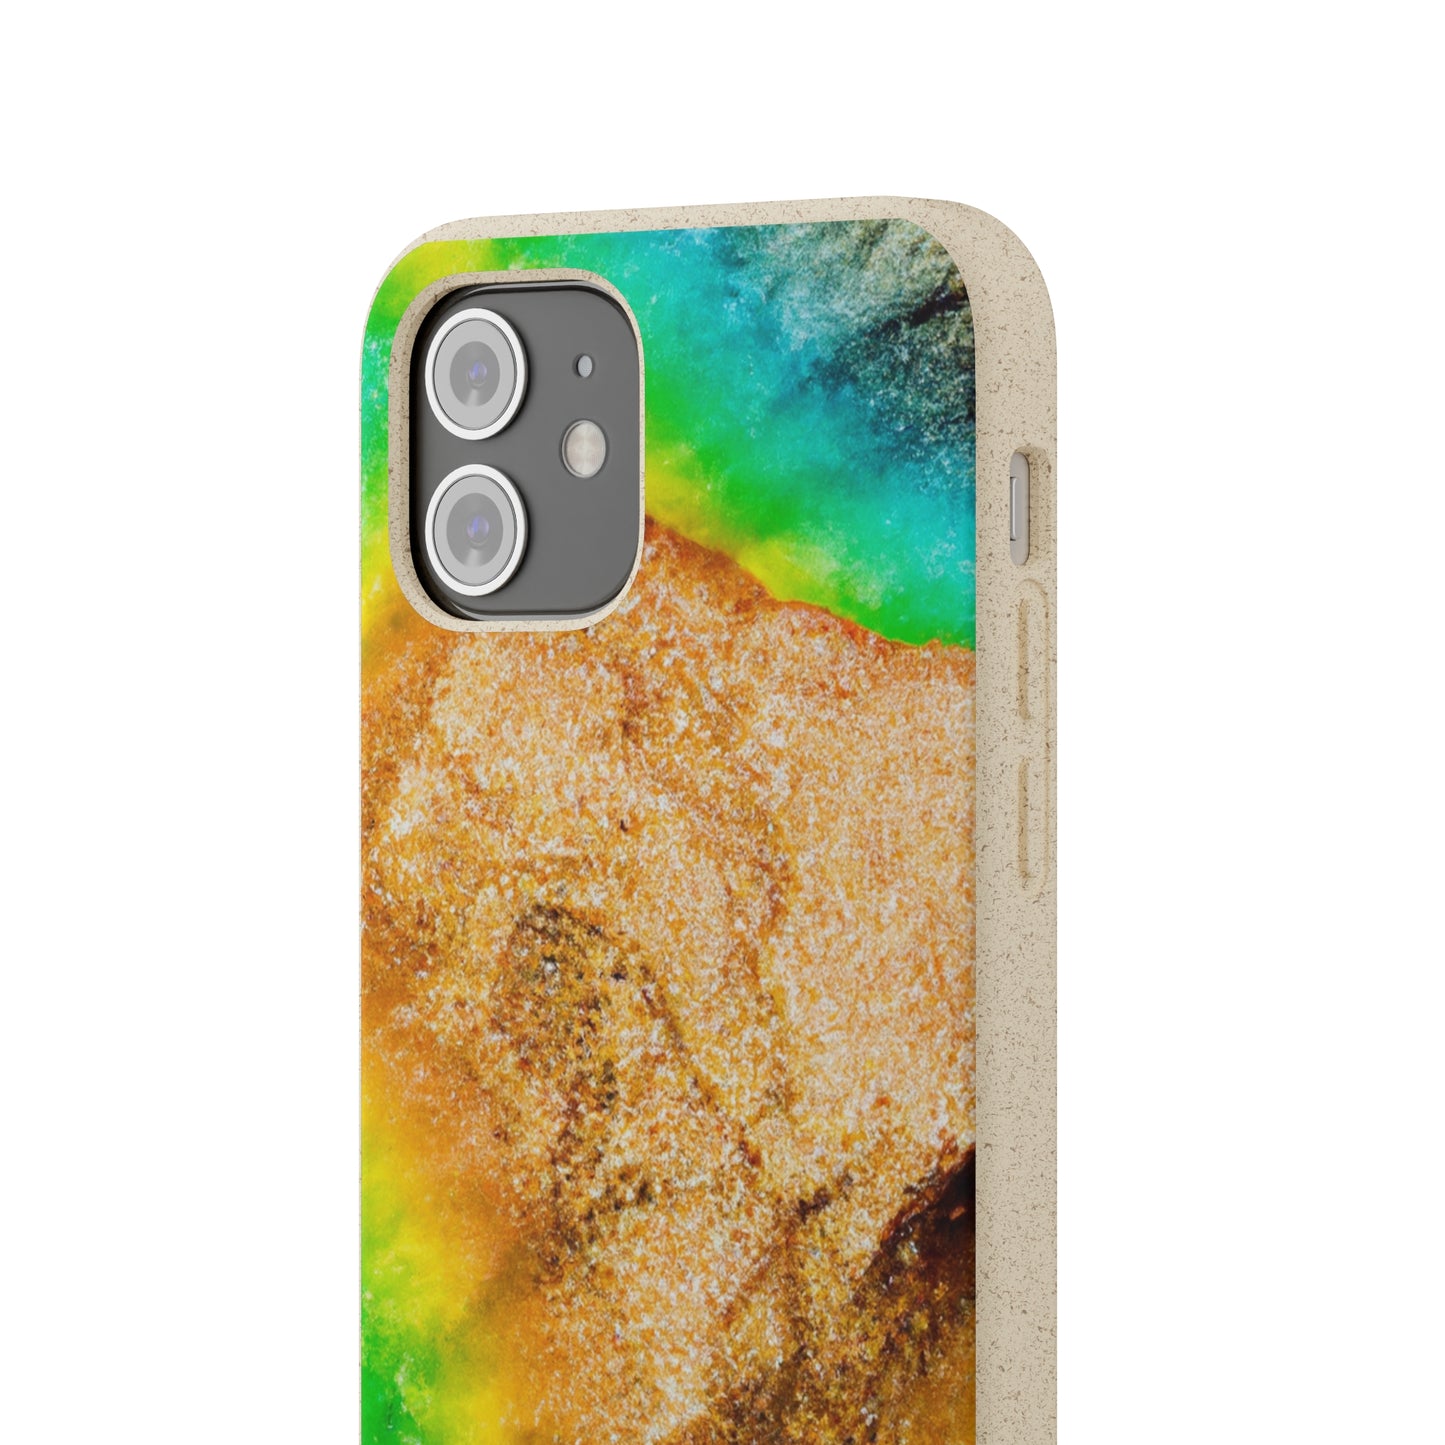 "Fusing Photography and Color: Creative Visuals Unleashed!" - Bam Boo! Lifestyle Eco-friendly Cases